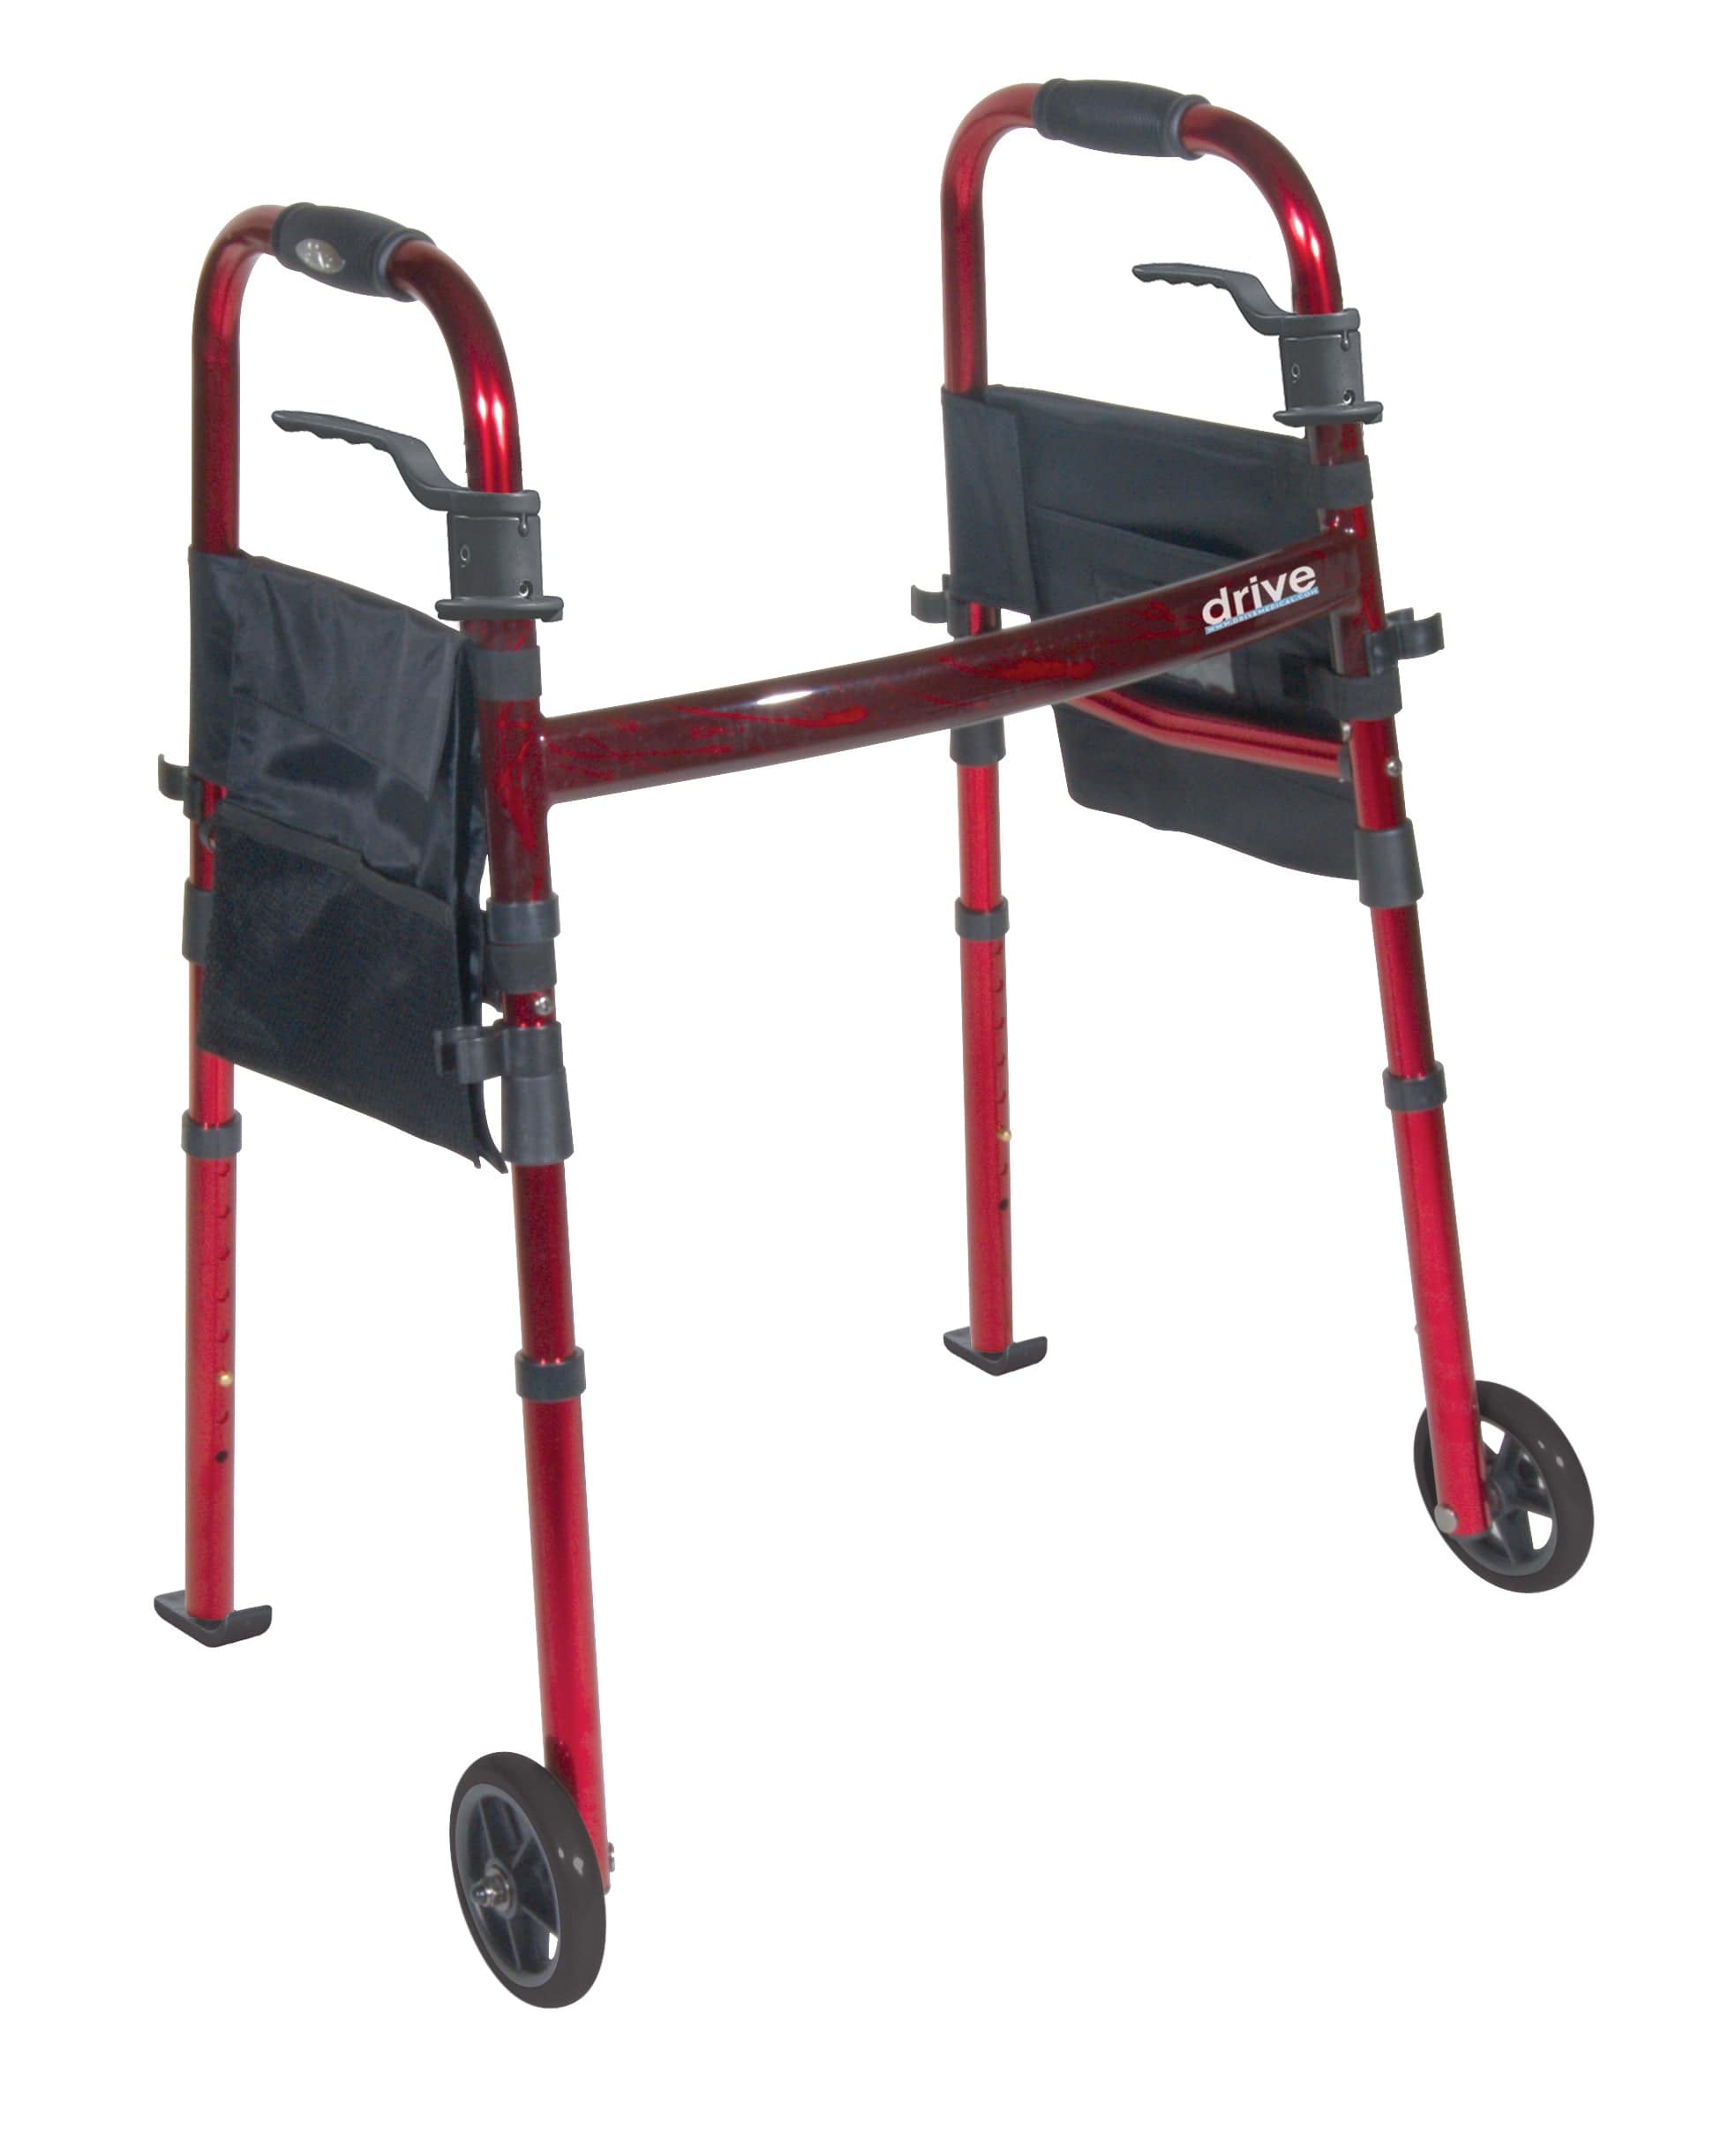 Drive Medical Drive Medical Portable Folding Travel Walker with 5" Wheels and Fold up Legs rtl10263kdr